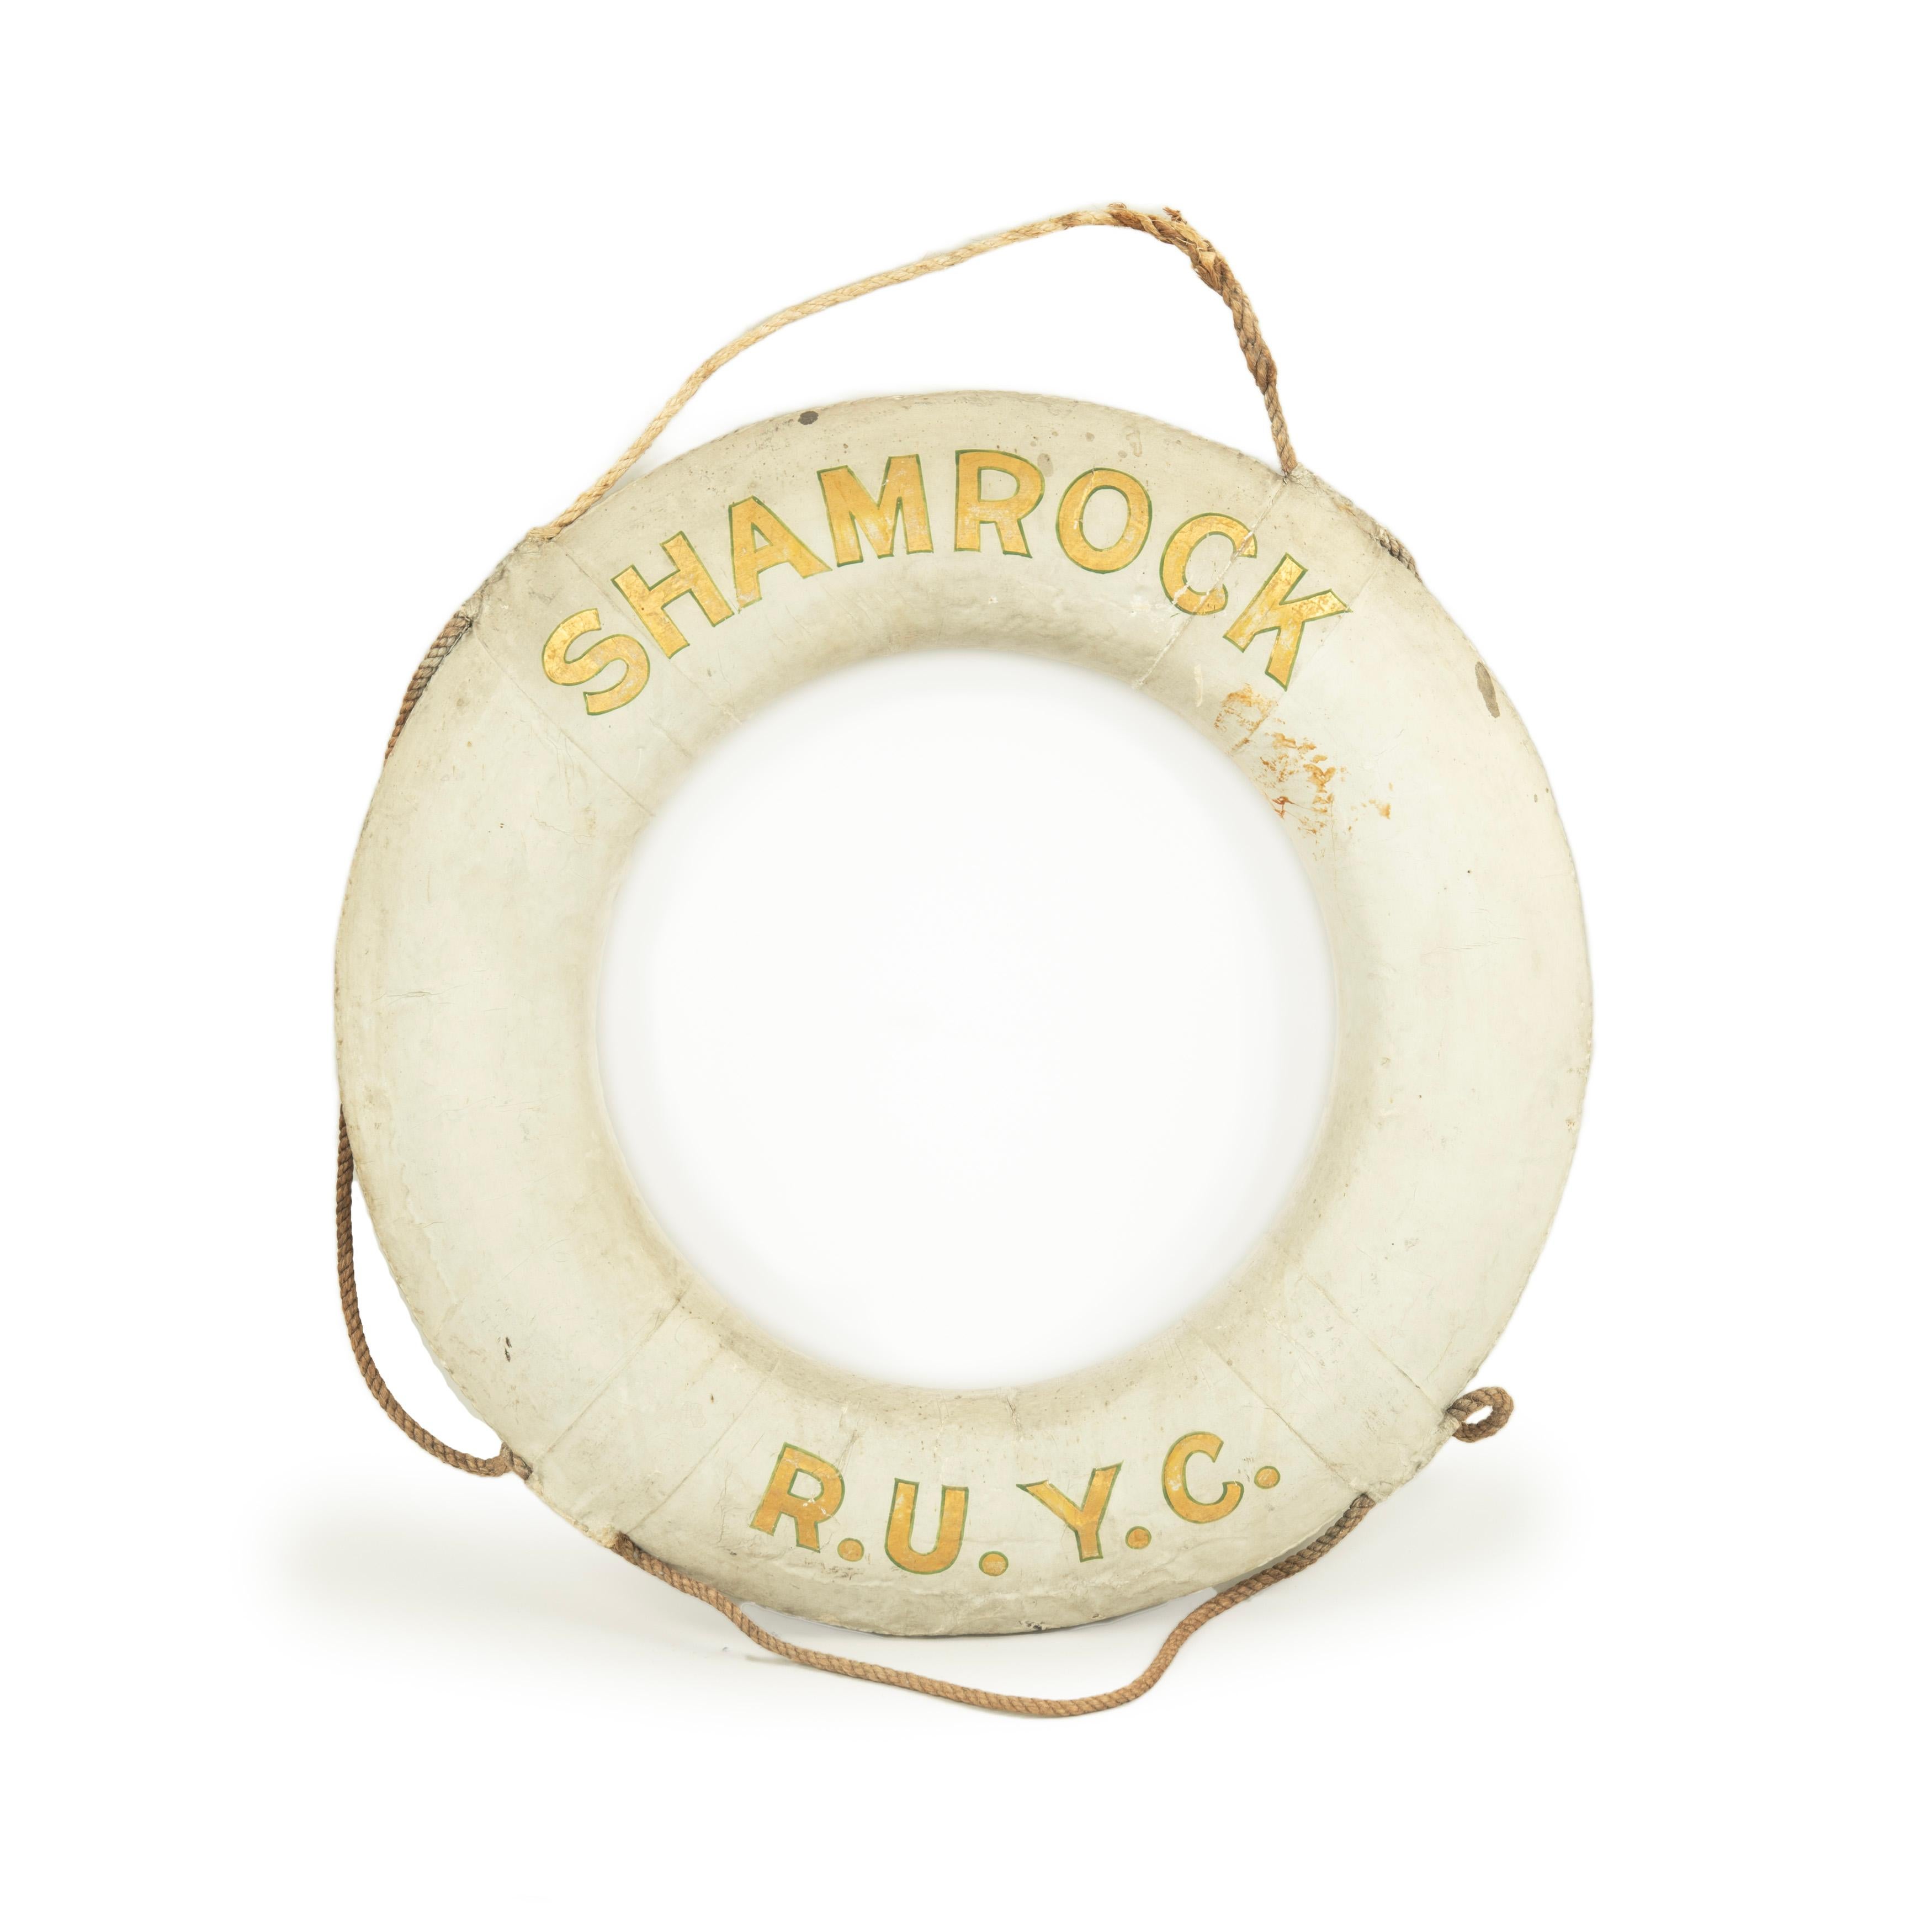 English An original life ring from the America’s Cup yacht ‘Shamrock’, Royal Ulster Yach For Sale